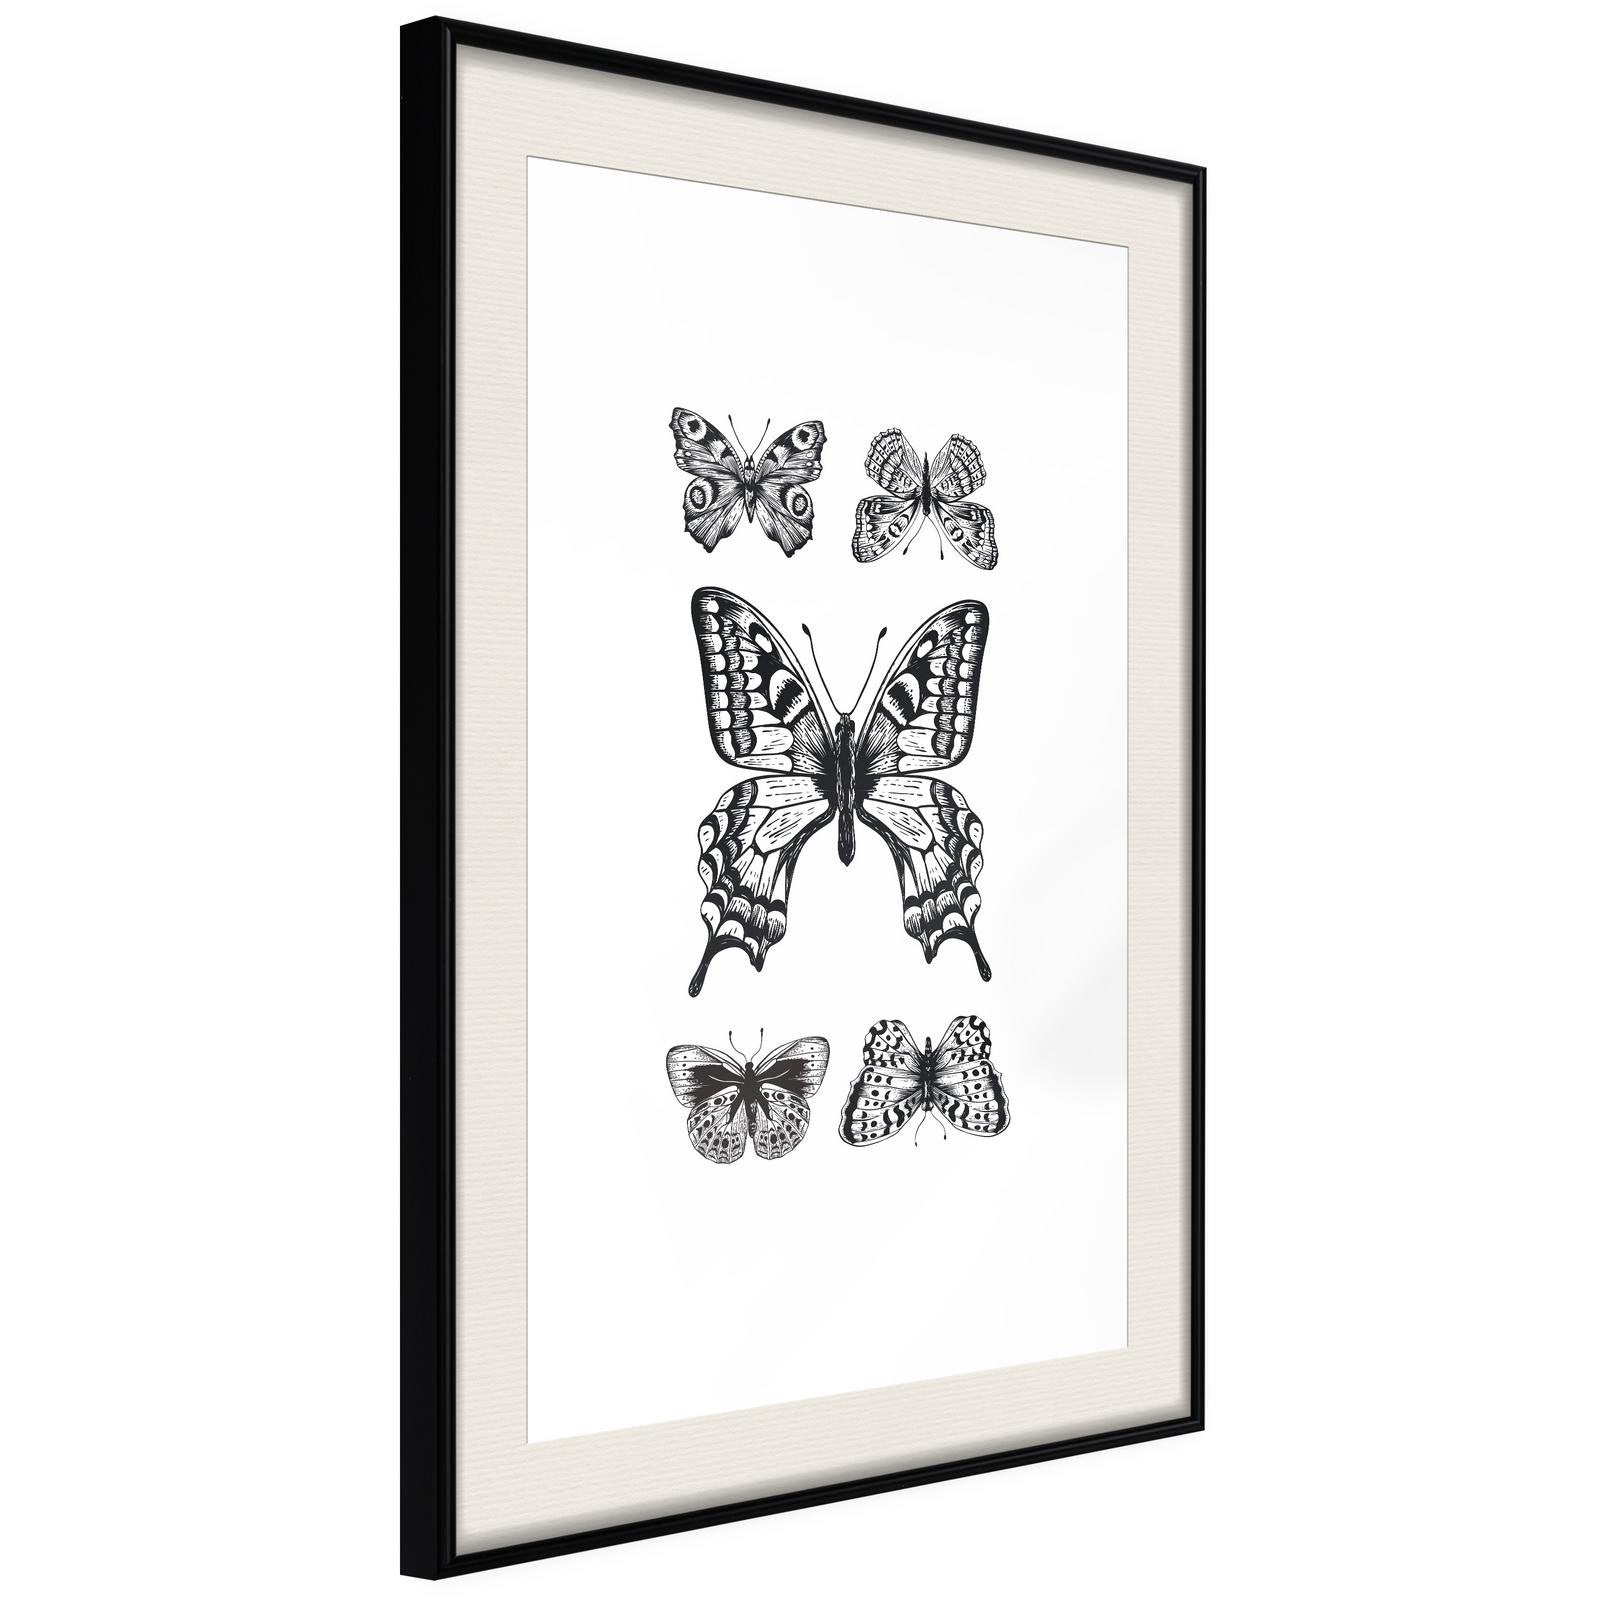 Inramad Poster / Tavla - Butterfly Collection IV-Poster Inramad-Artgeist-20x30-Svart ram med passepartout-peaceofhome.se